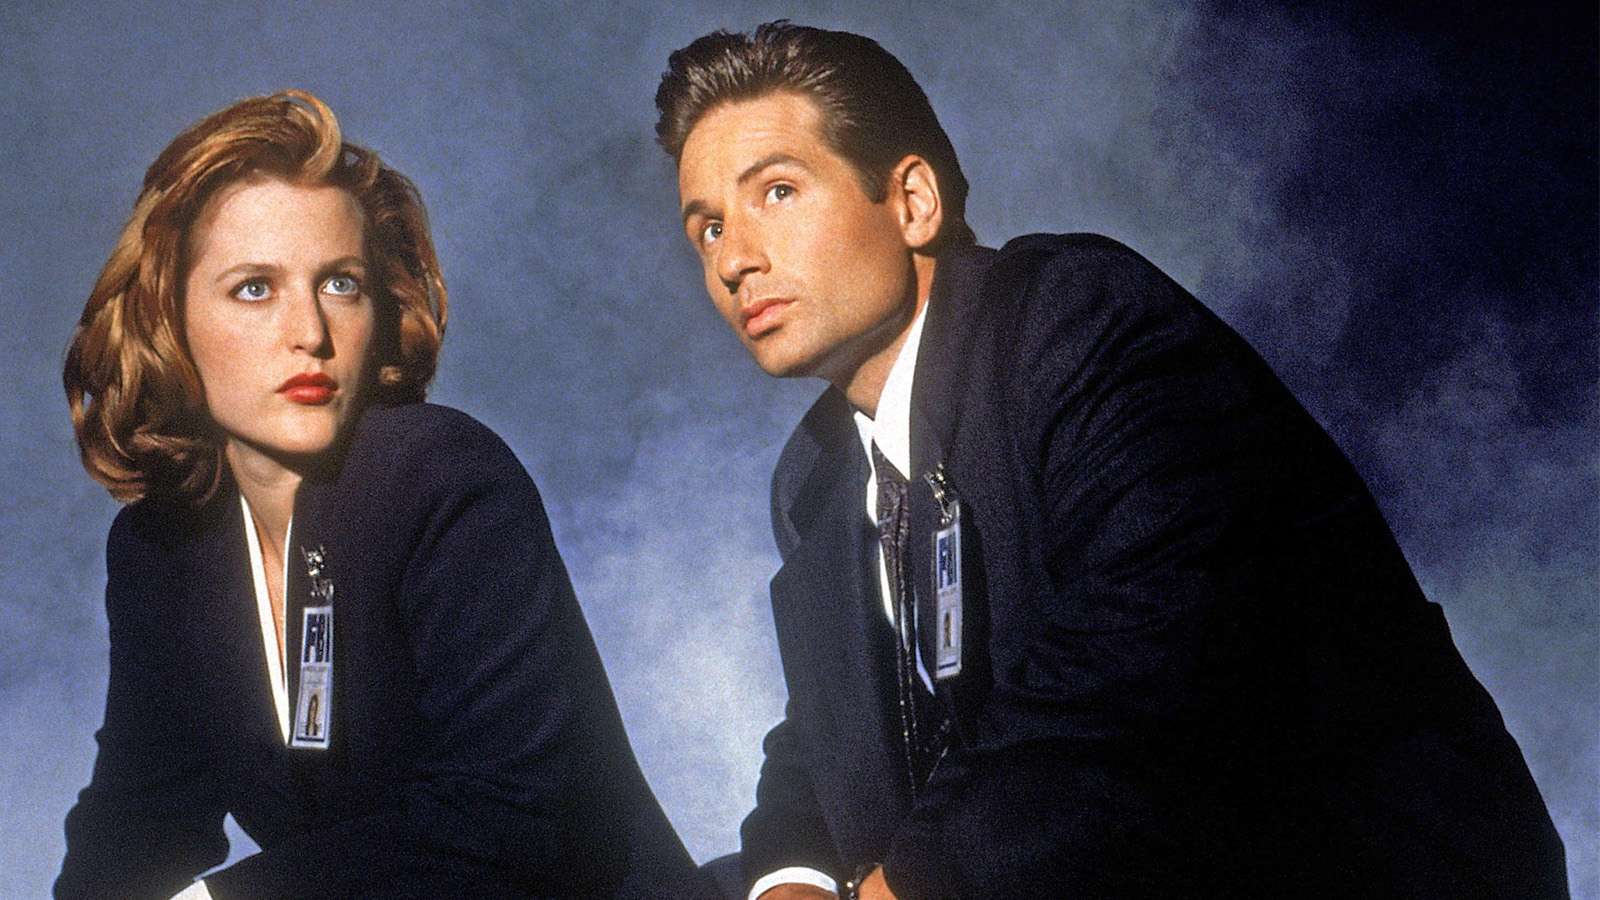 X-Files promotional imagery